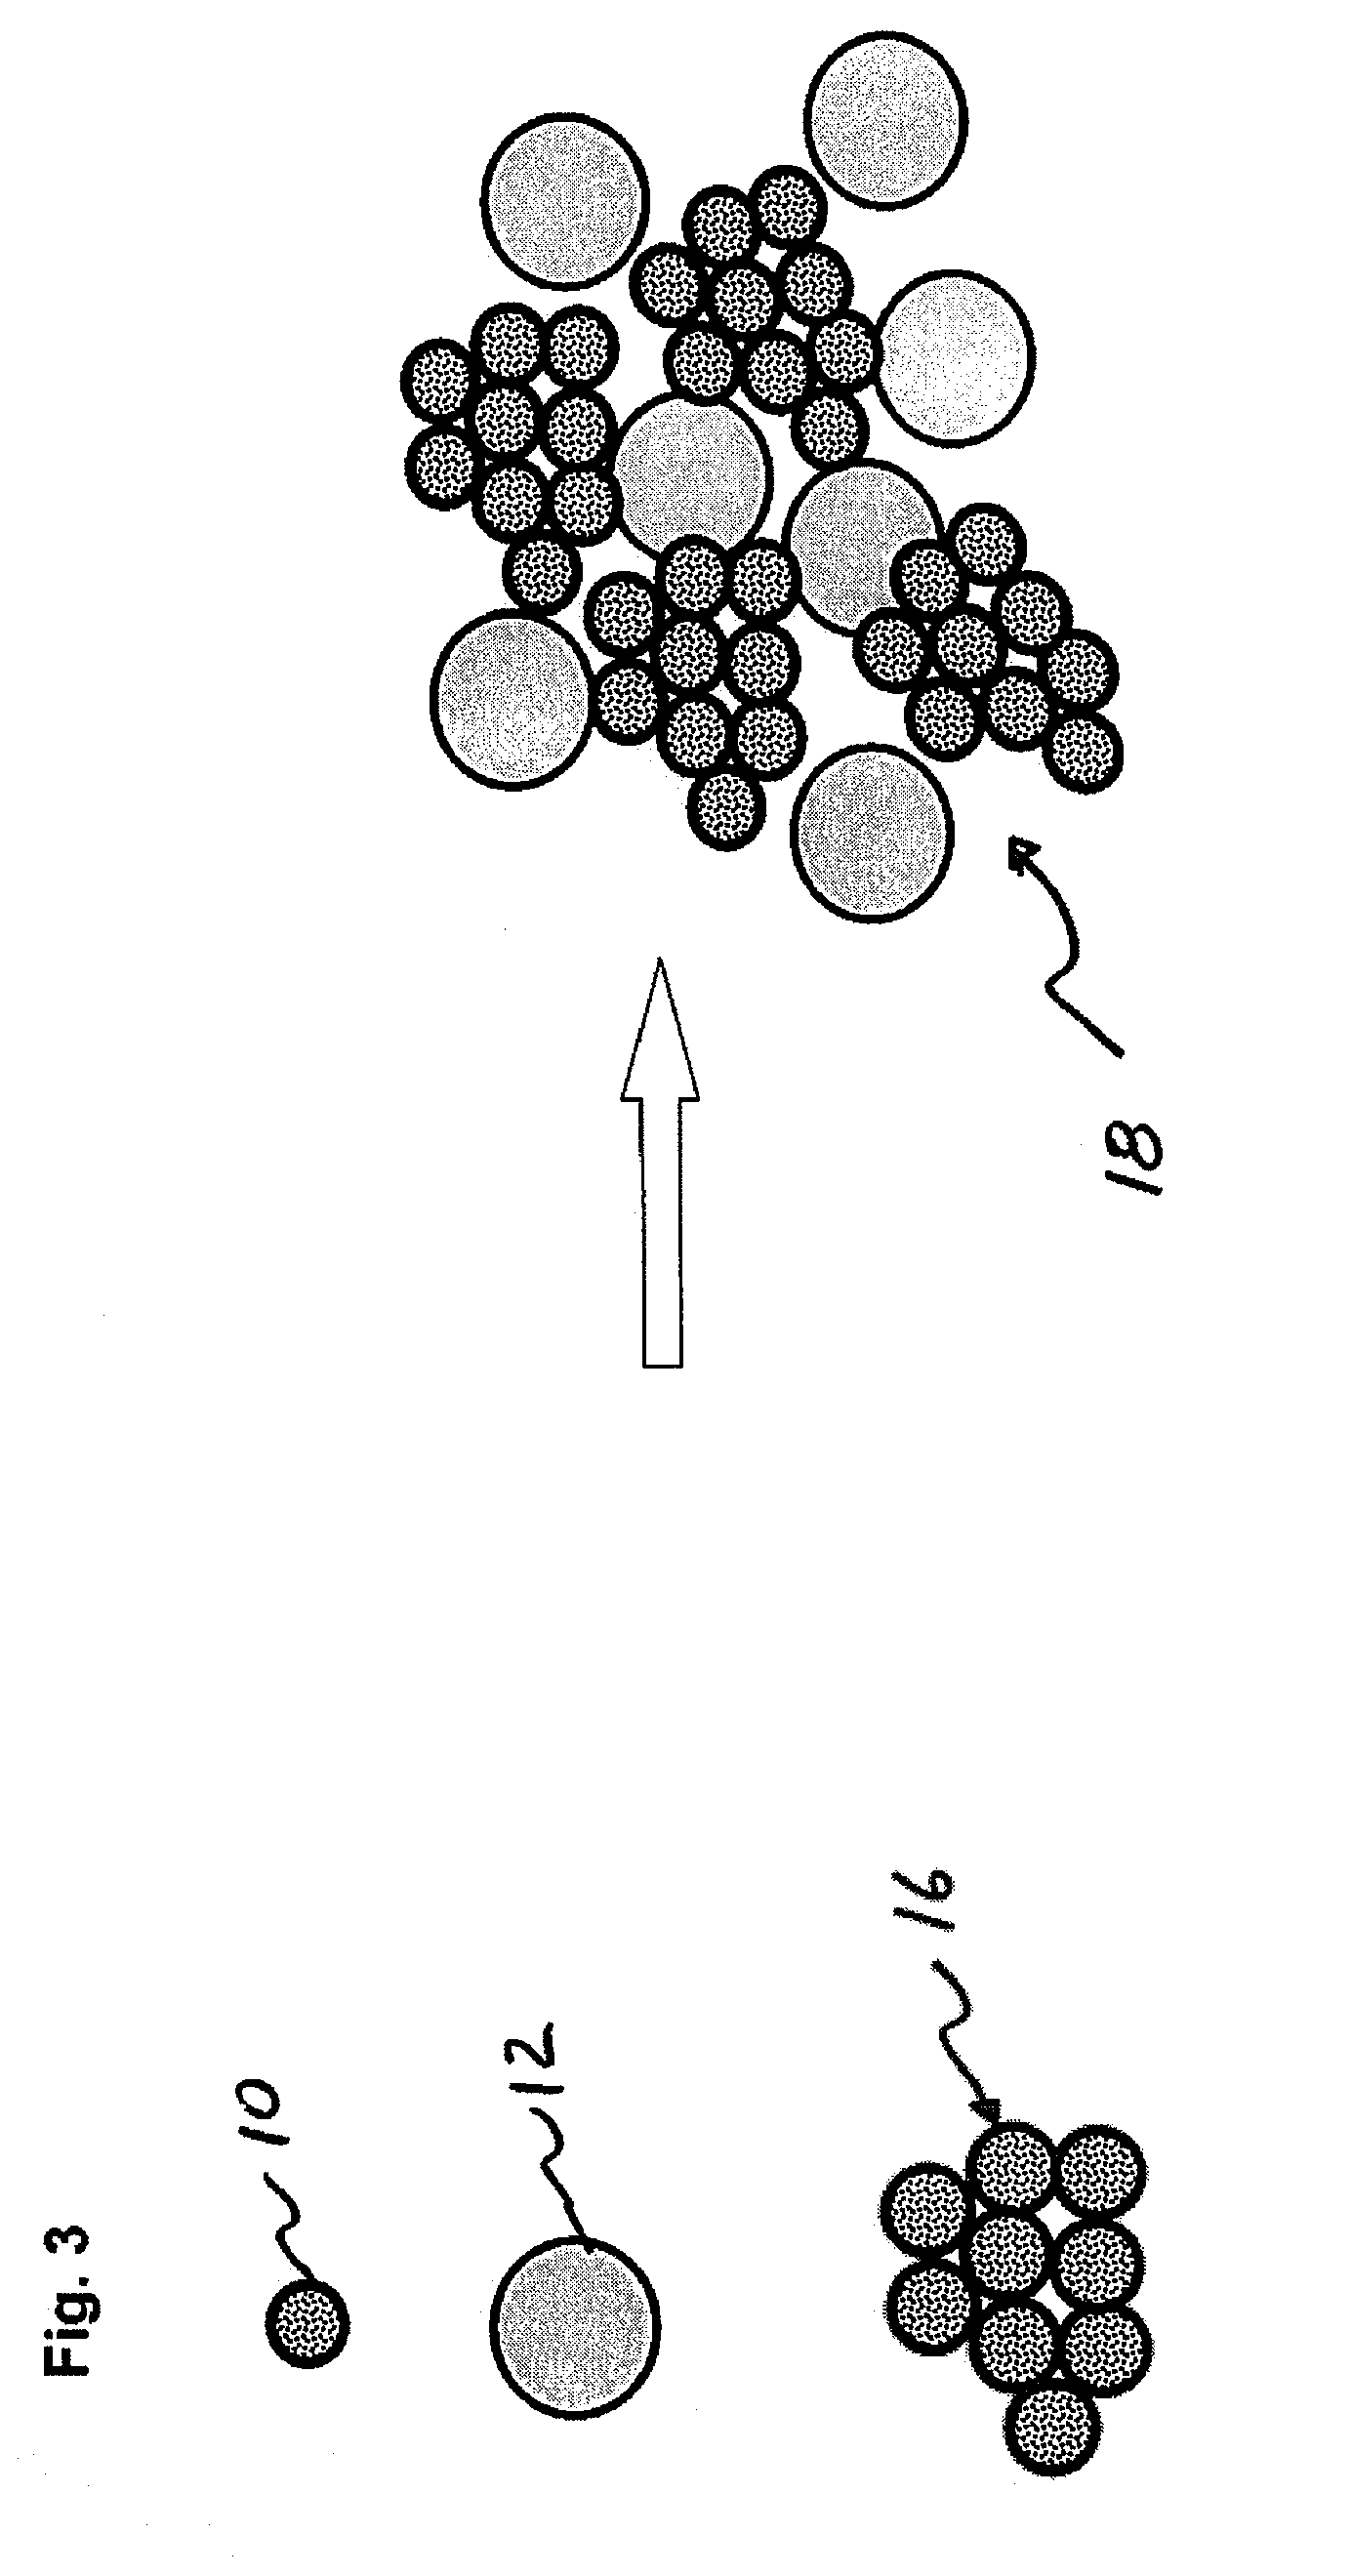 Abradable composition and method of manufacture